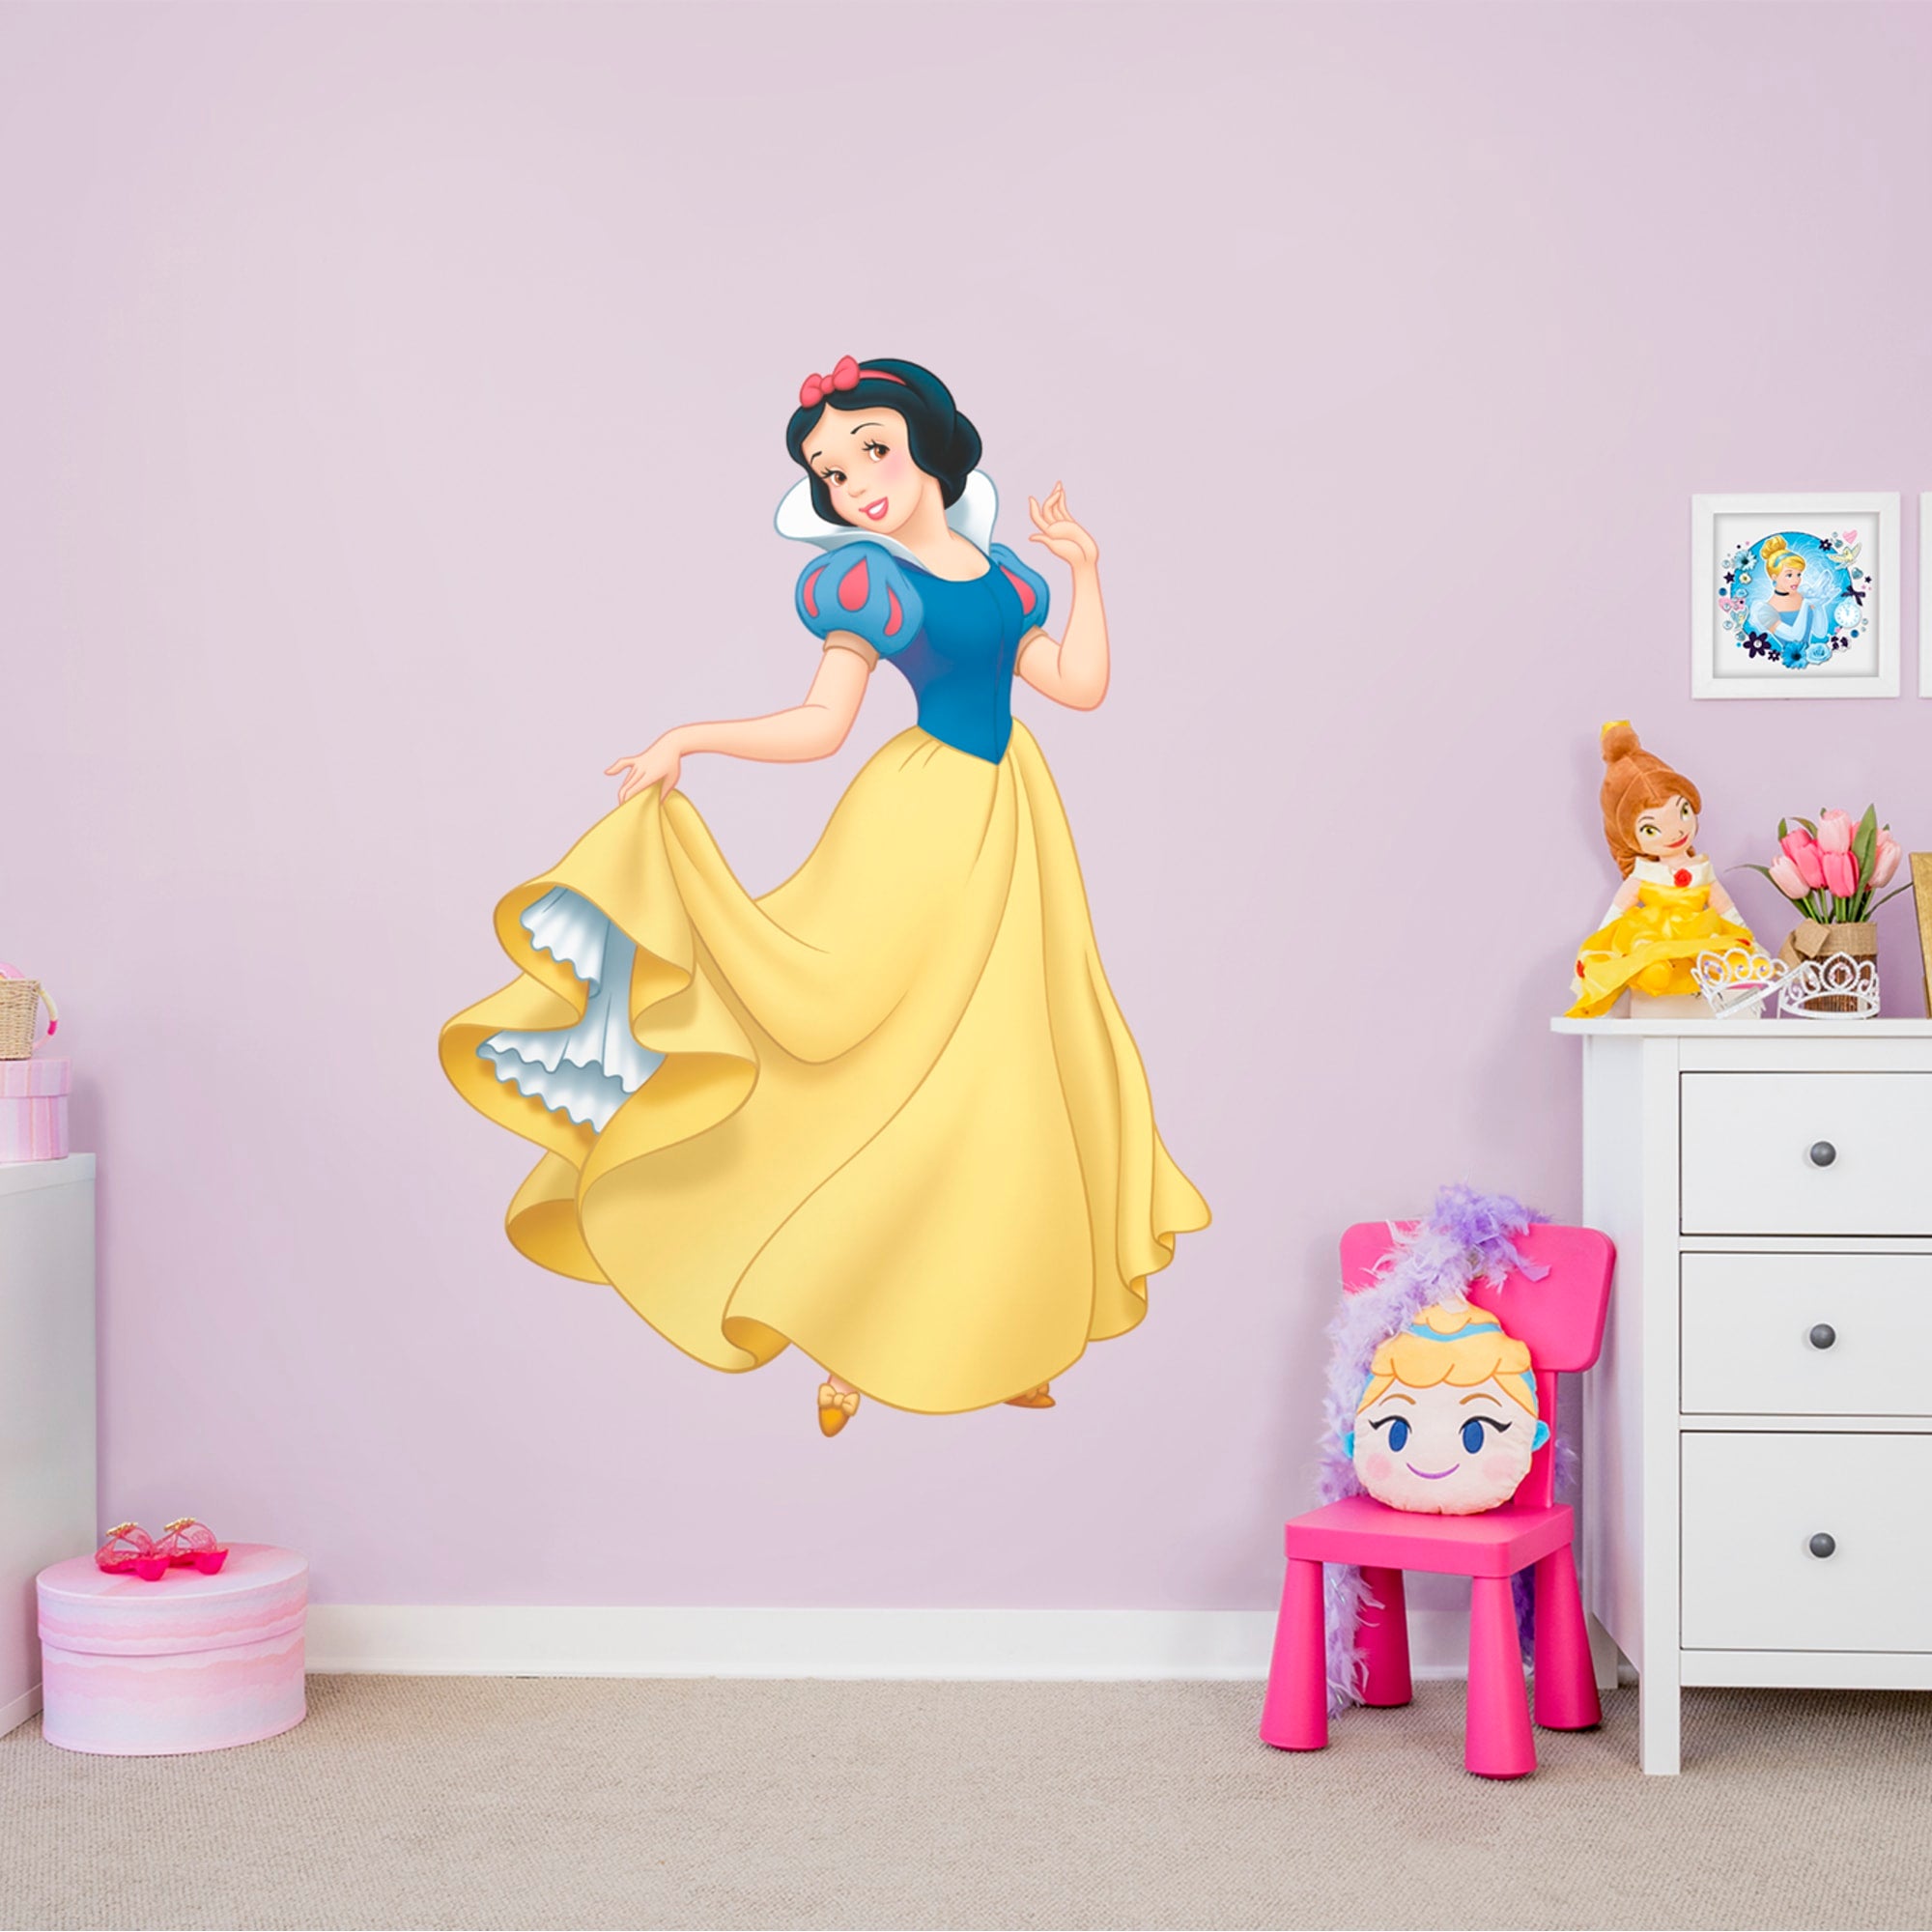 Snow White - Officially Licensed Disney Removable Wall Decal 44.0"W x 61.0"H by Fathead | Vinyl